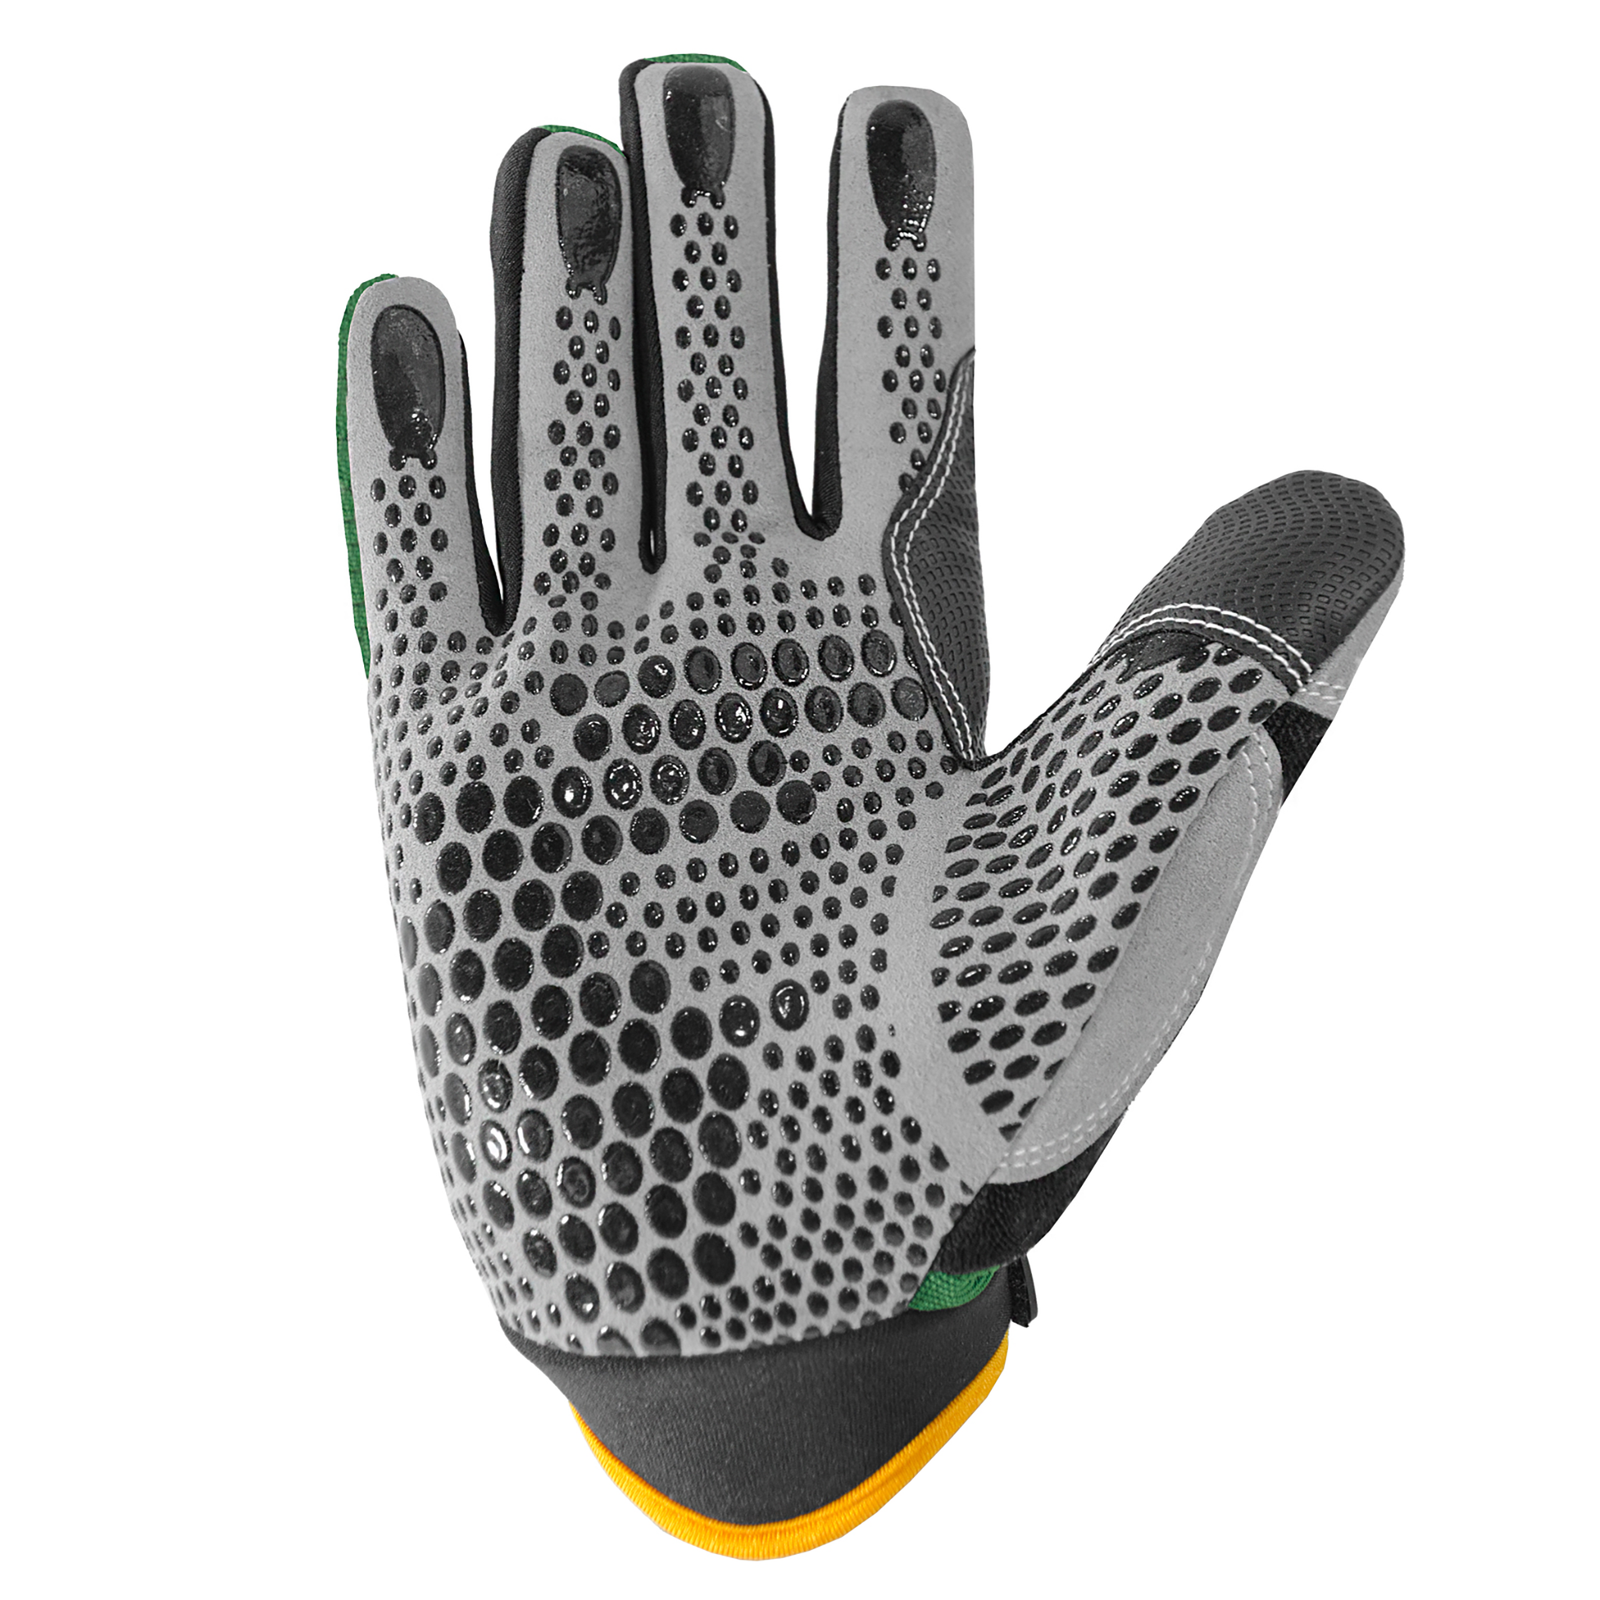 Palm view of the green JORESTECH safety work glove with anti slip silicone black dotted palms